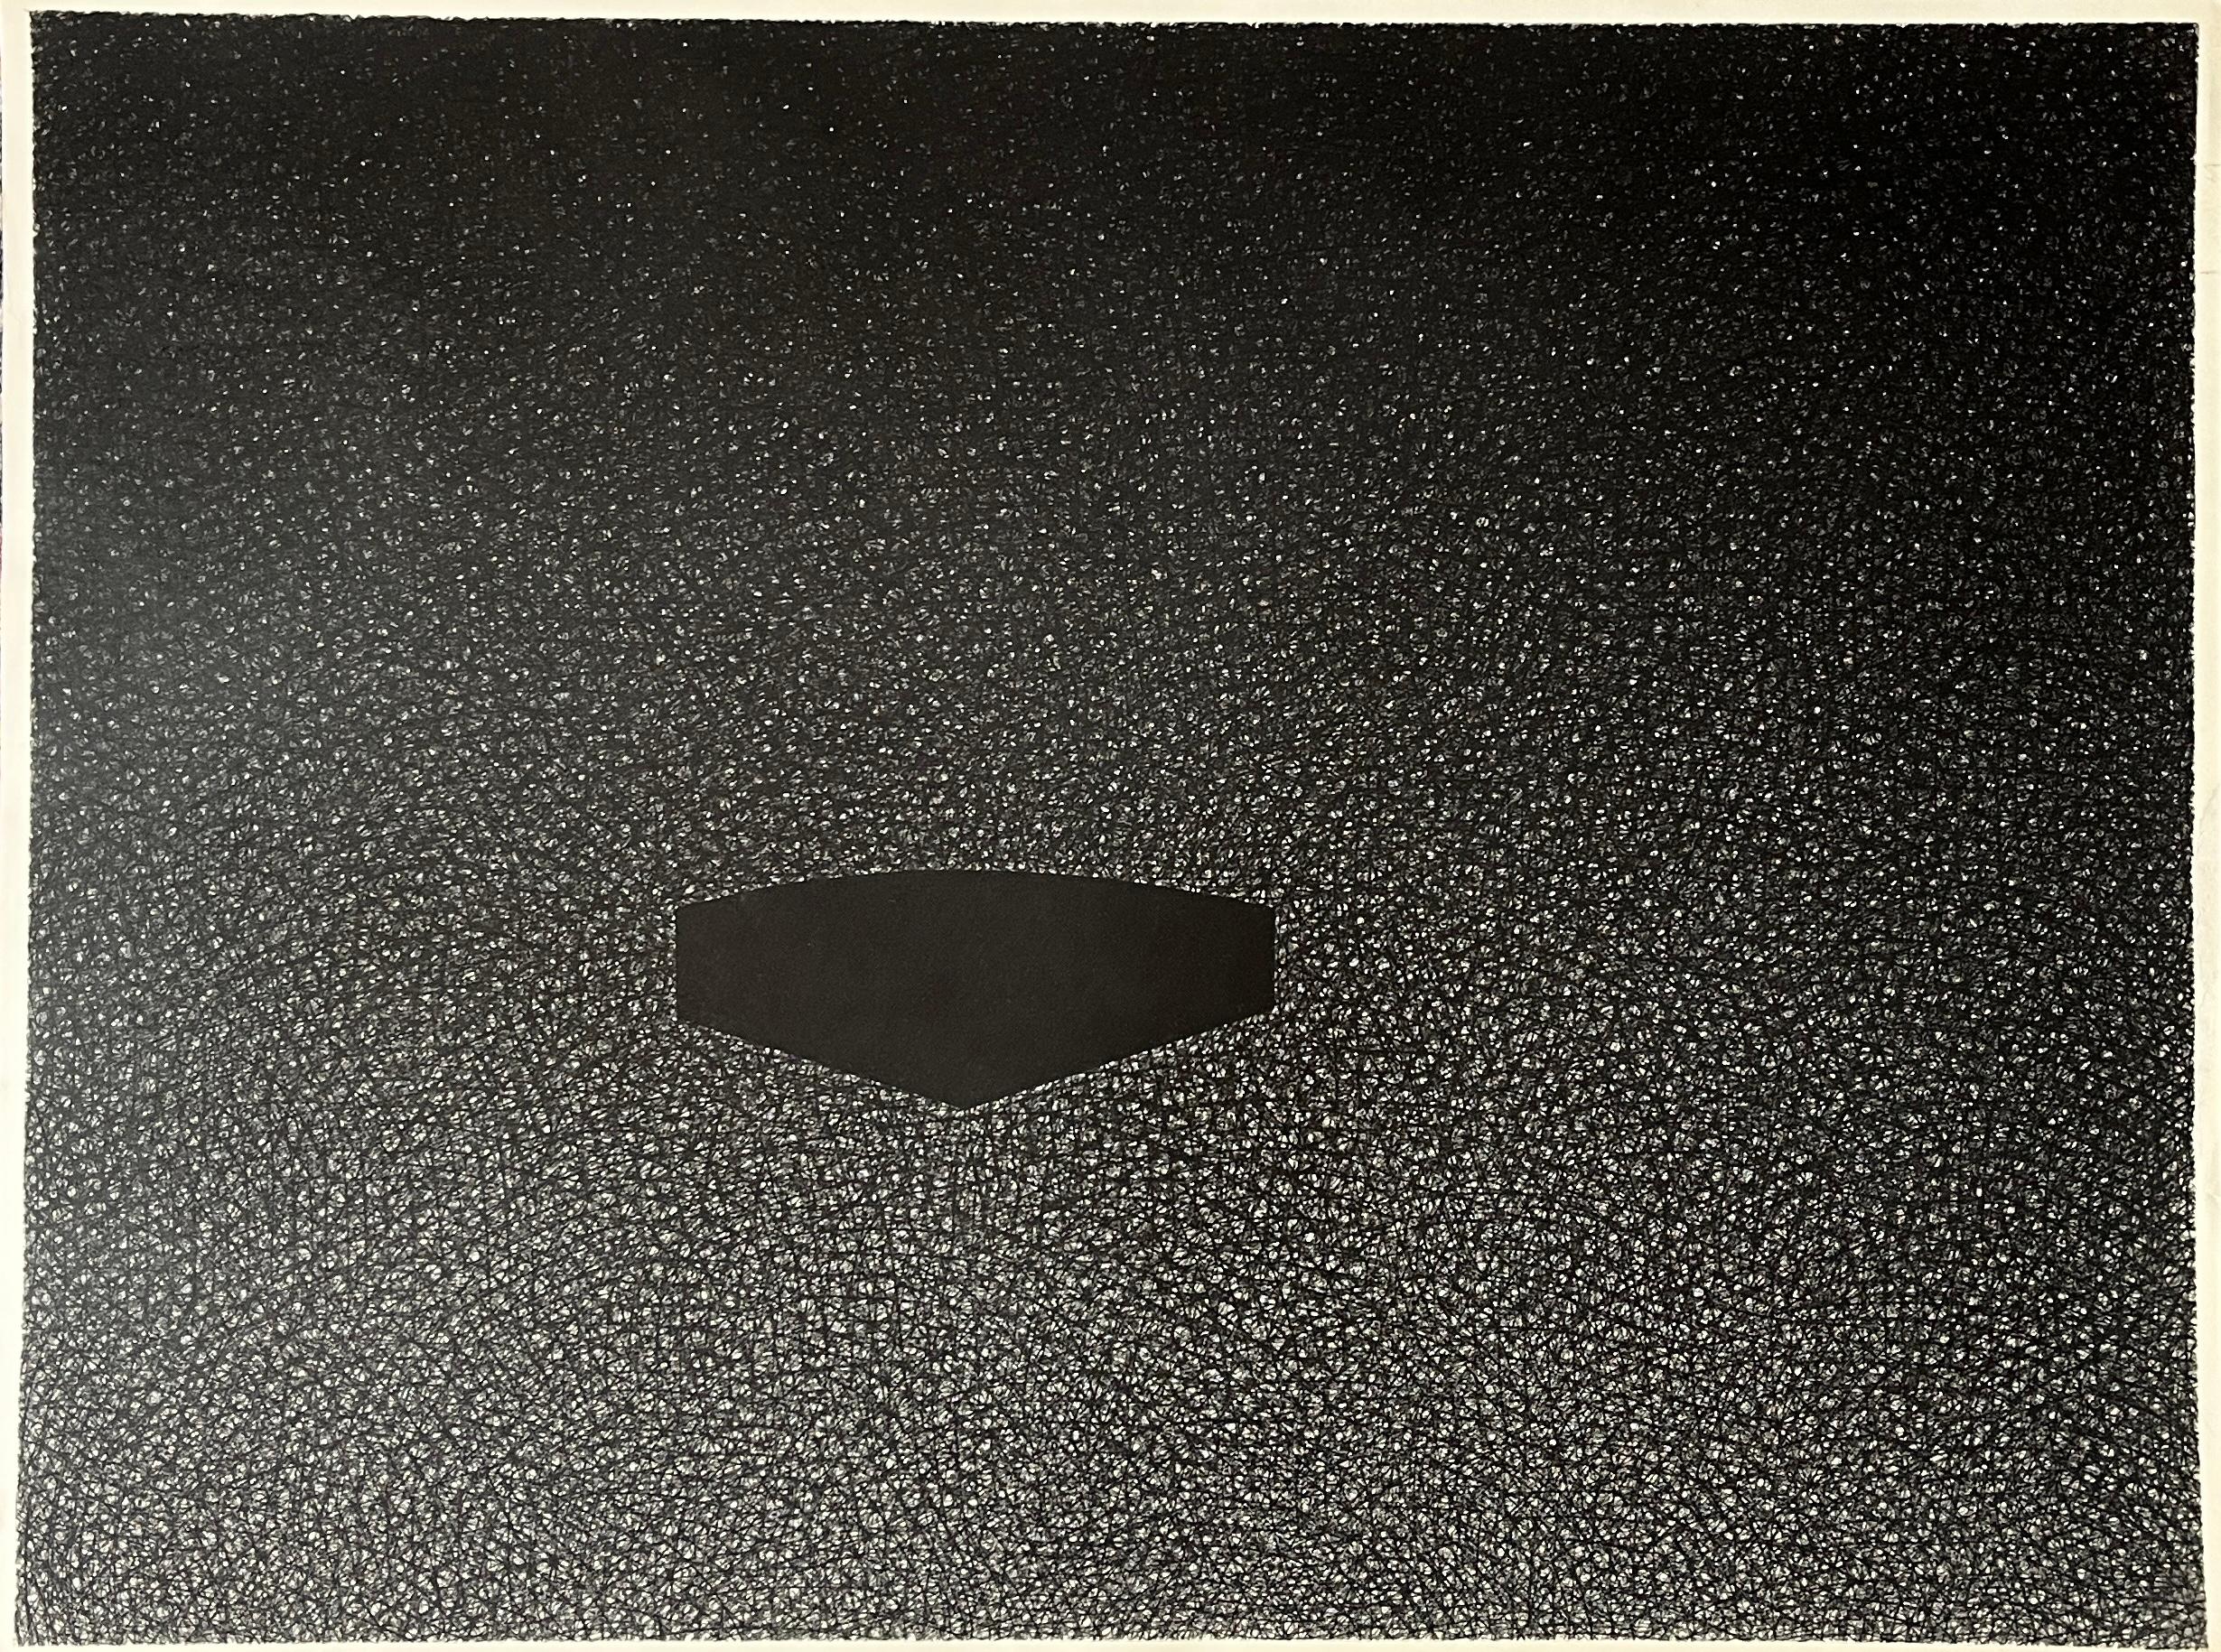 Jack Scott Abstract Drawing - 1980s "#13" Cross-Hatch Abstract Charcoal Drawing MinimalistModern Art